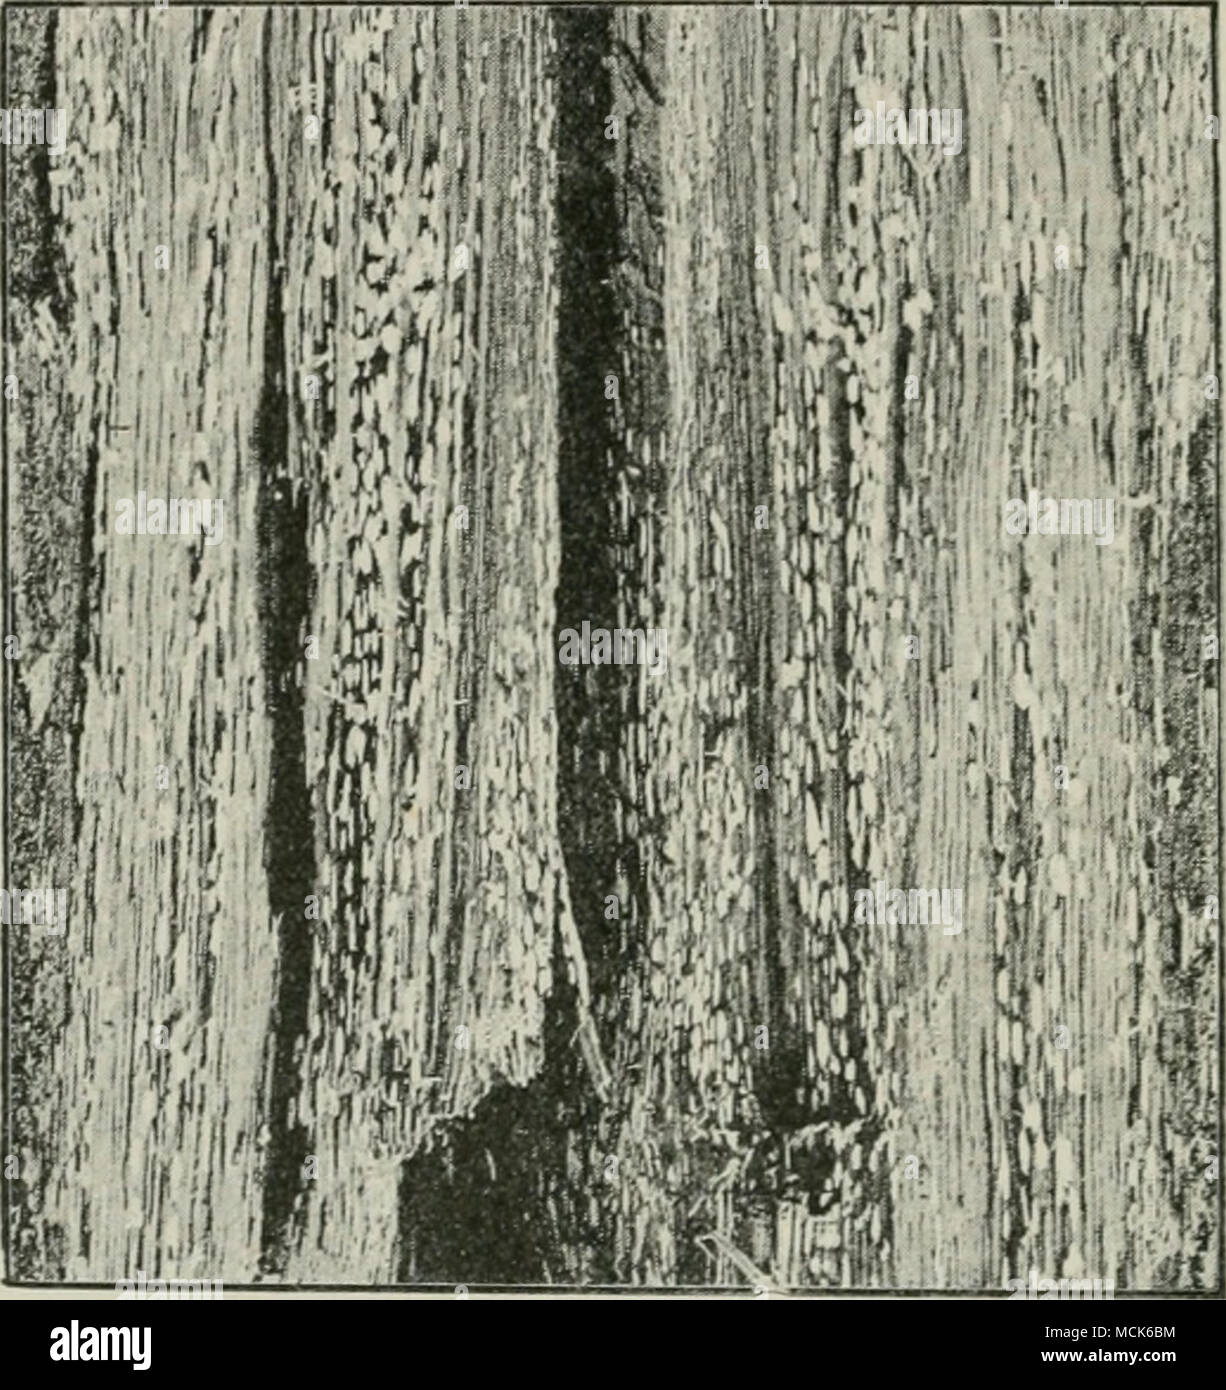 . Fig. 2(50.—Slereum Jrustulosum. Destruction of Oak-wood. Lougitudin.il section showing the brown wood with isolated hollow spots containing white mycelium, (v. Tubeuf phot.) Stereum frustulosum Fries. (Thelephora perdix Hartig).^ (Britain and U.S. America.) The sporophores form greyish- brown plate-like crusts with concentric markings; they are small, never exceeding the size of a finger-nail, but generally occur in numbers together. The hymenial layer is composed of club- shaped basidia beset with hair-like outgrowths; some of the basidia produce four spores, others are sterile and grow on  Stock Photo